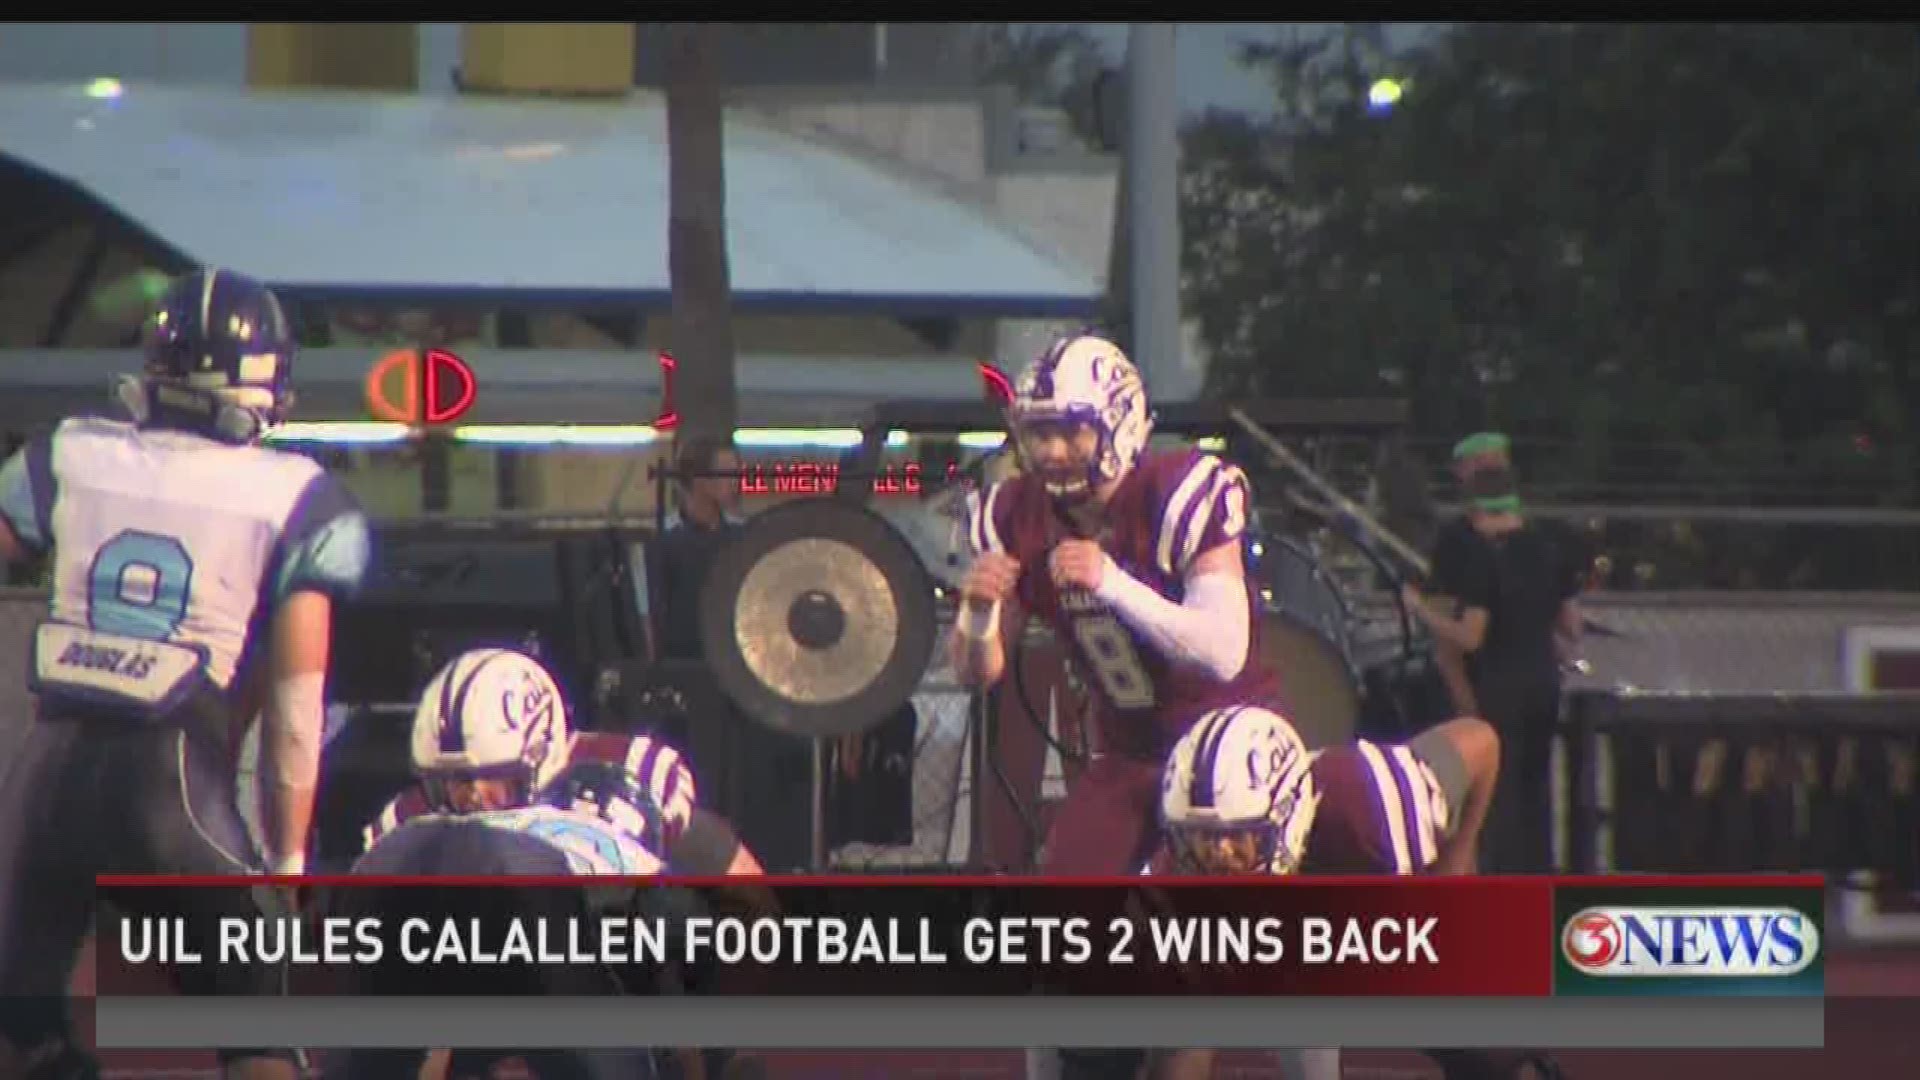 The Calallen Wildcats have officially won their appeal with the UIL and will regain their wins versus the Carroll and King high school football teams.